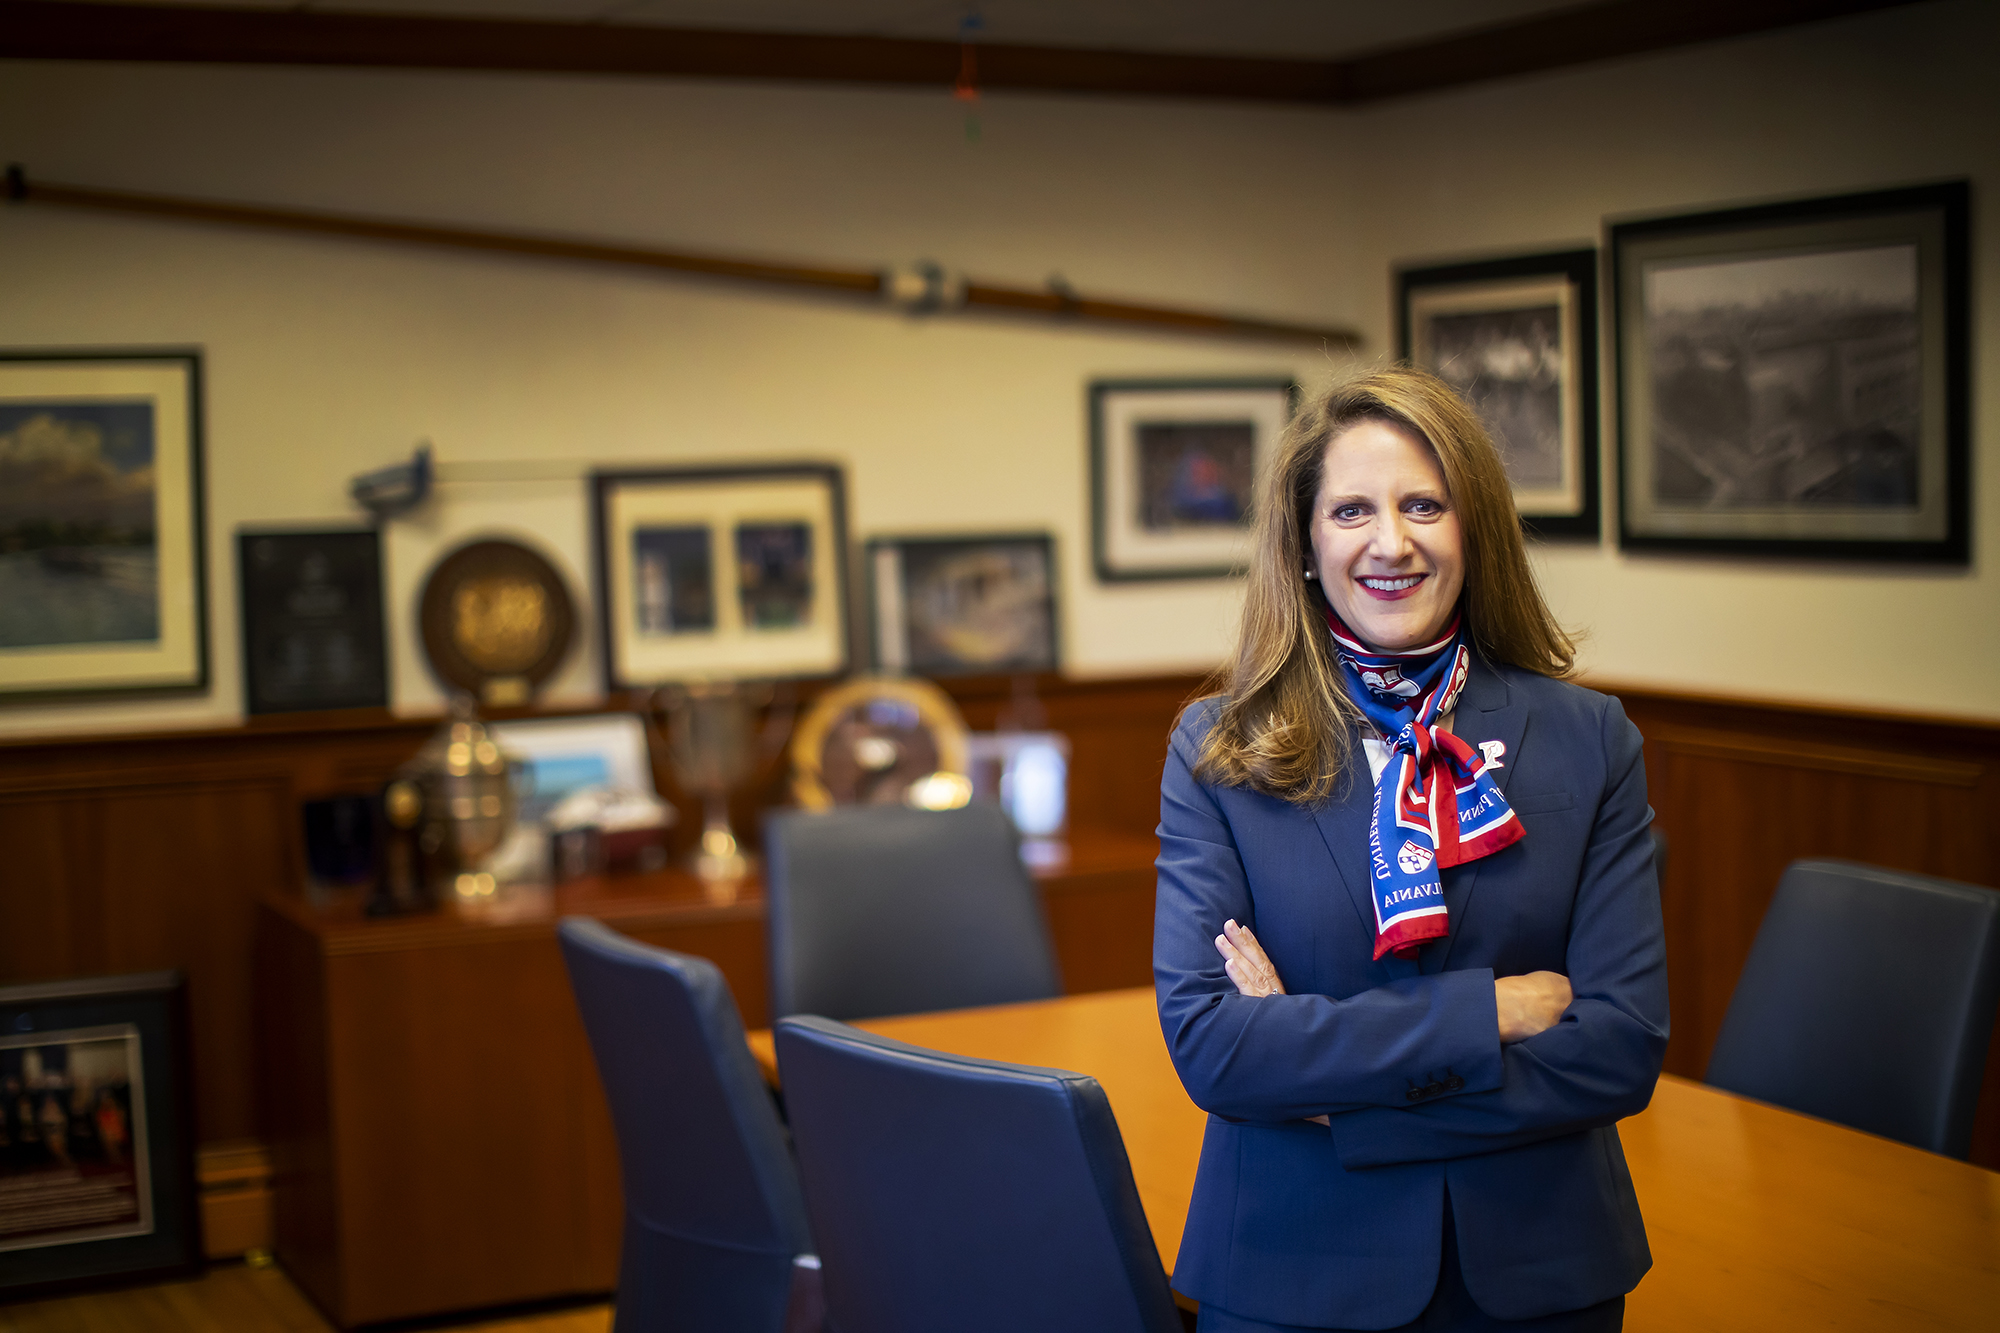 AD M. Grace Calhoun stands with her arms folder while wearing a blue suit and Penn scarf in her office.